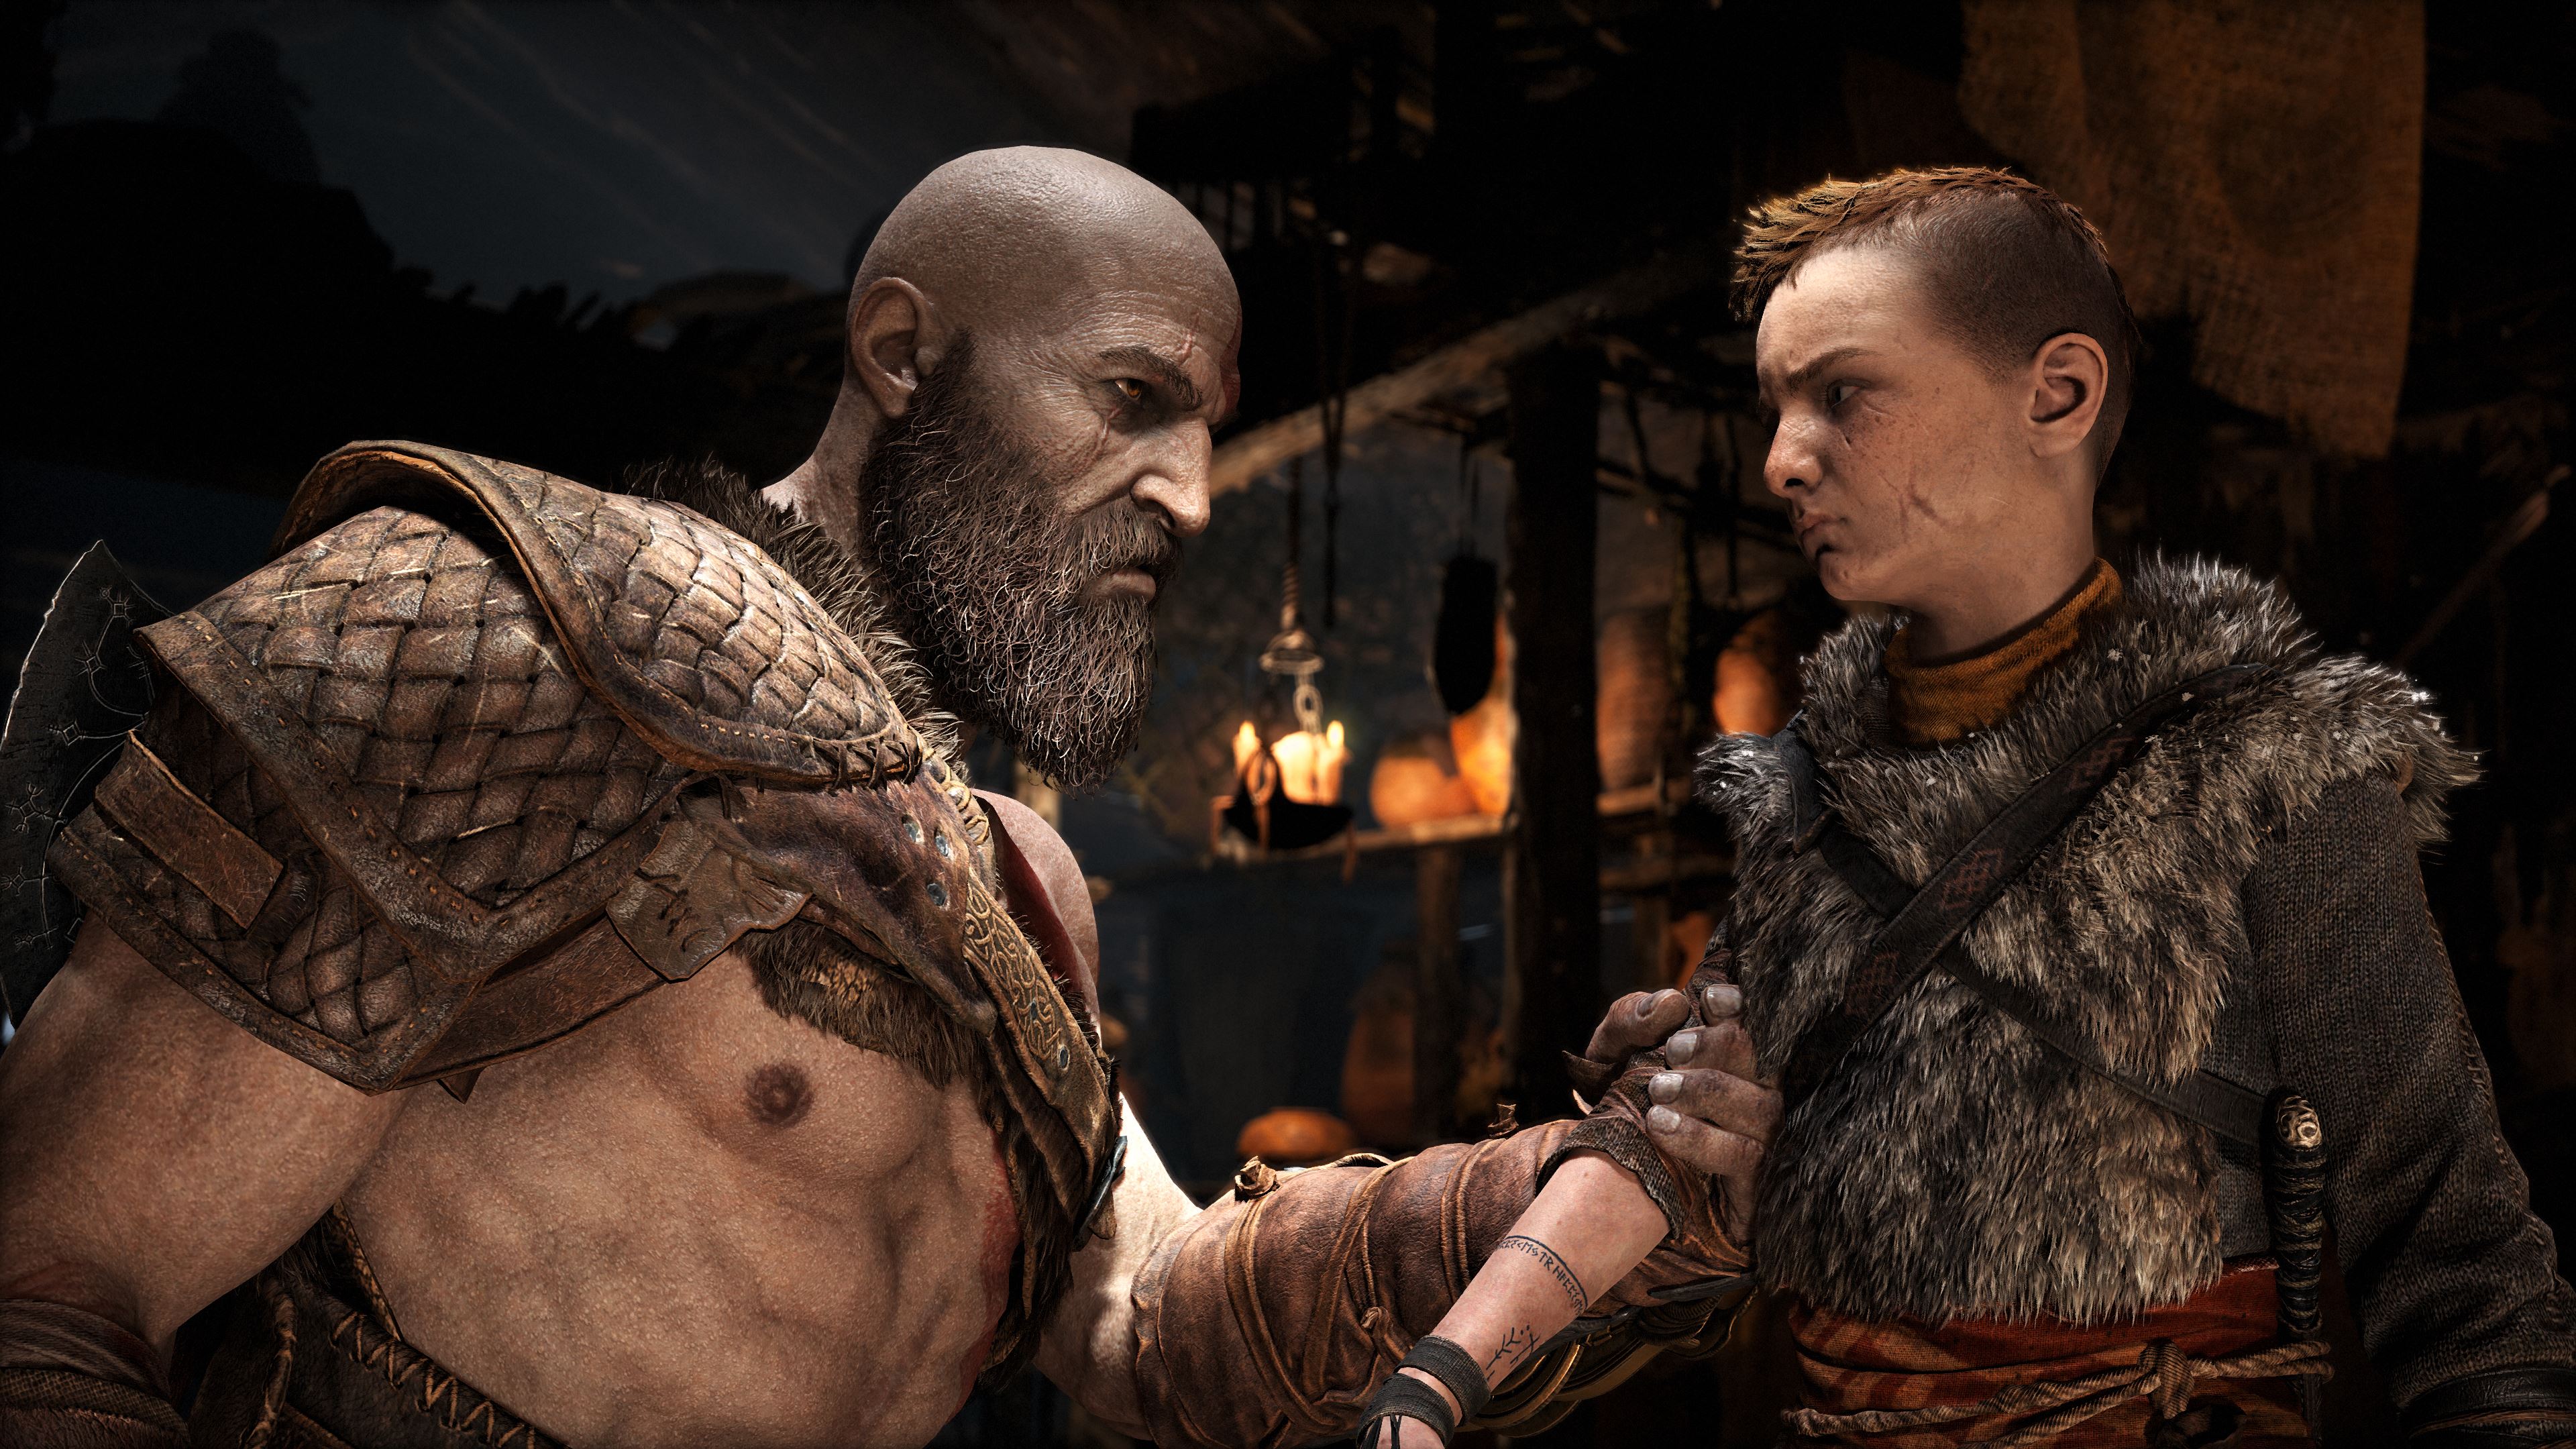 God of War Ragnarok doesn't shy away from ugly family truths